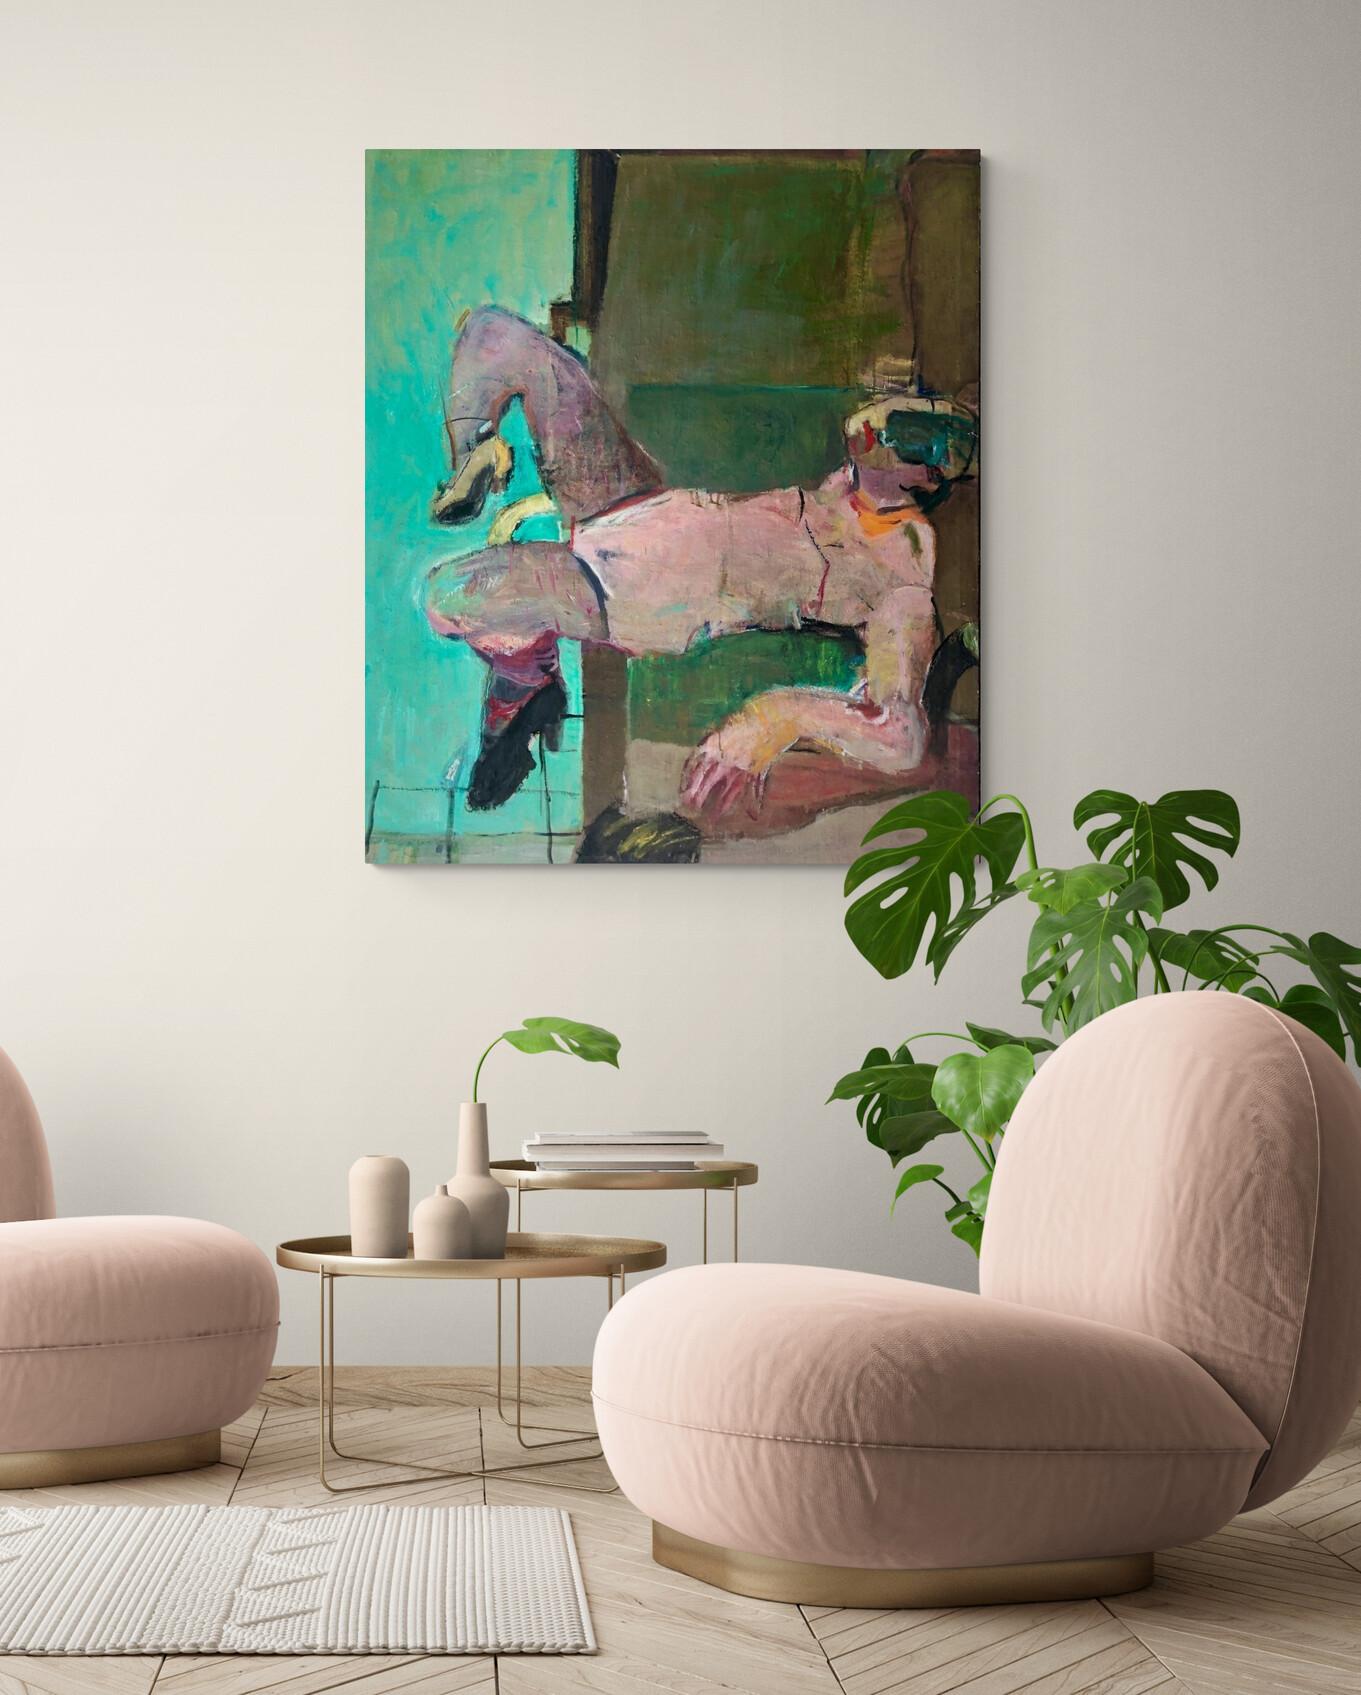 This complex, yet abstract artwork is a typical piece by Ilana Seati, exploring themes of the human condition, truth and fantasy. This bold composition on stretched canvas measures at 125 x 105 cm and is ready to hang. Framing on request.